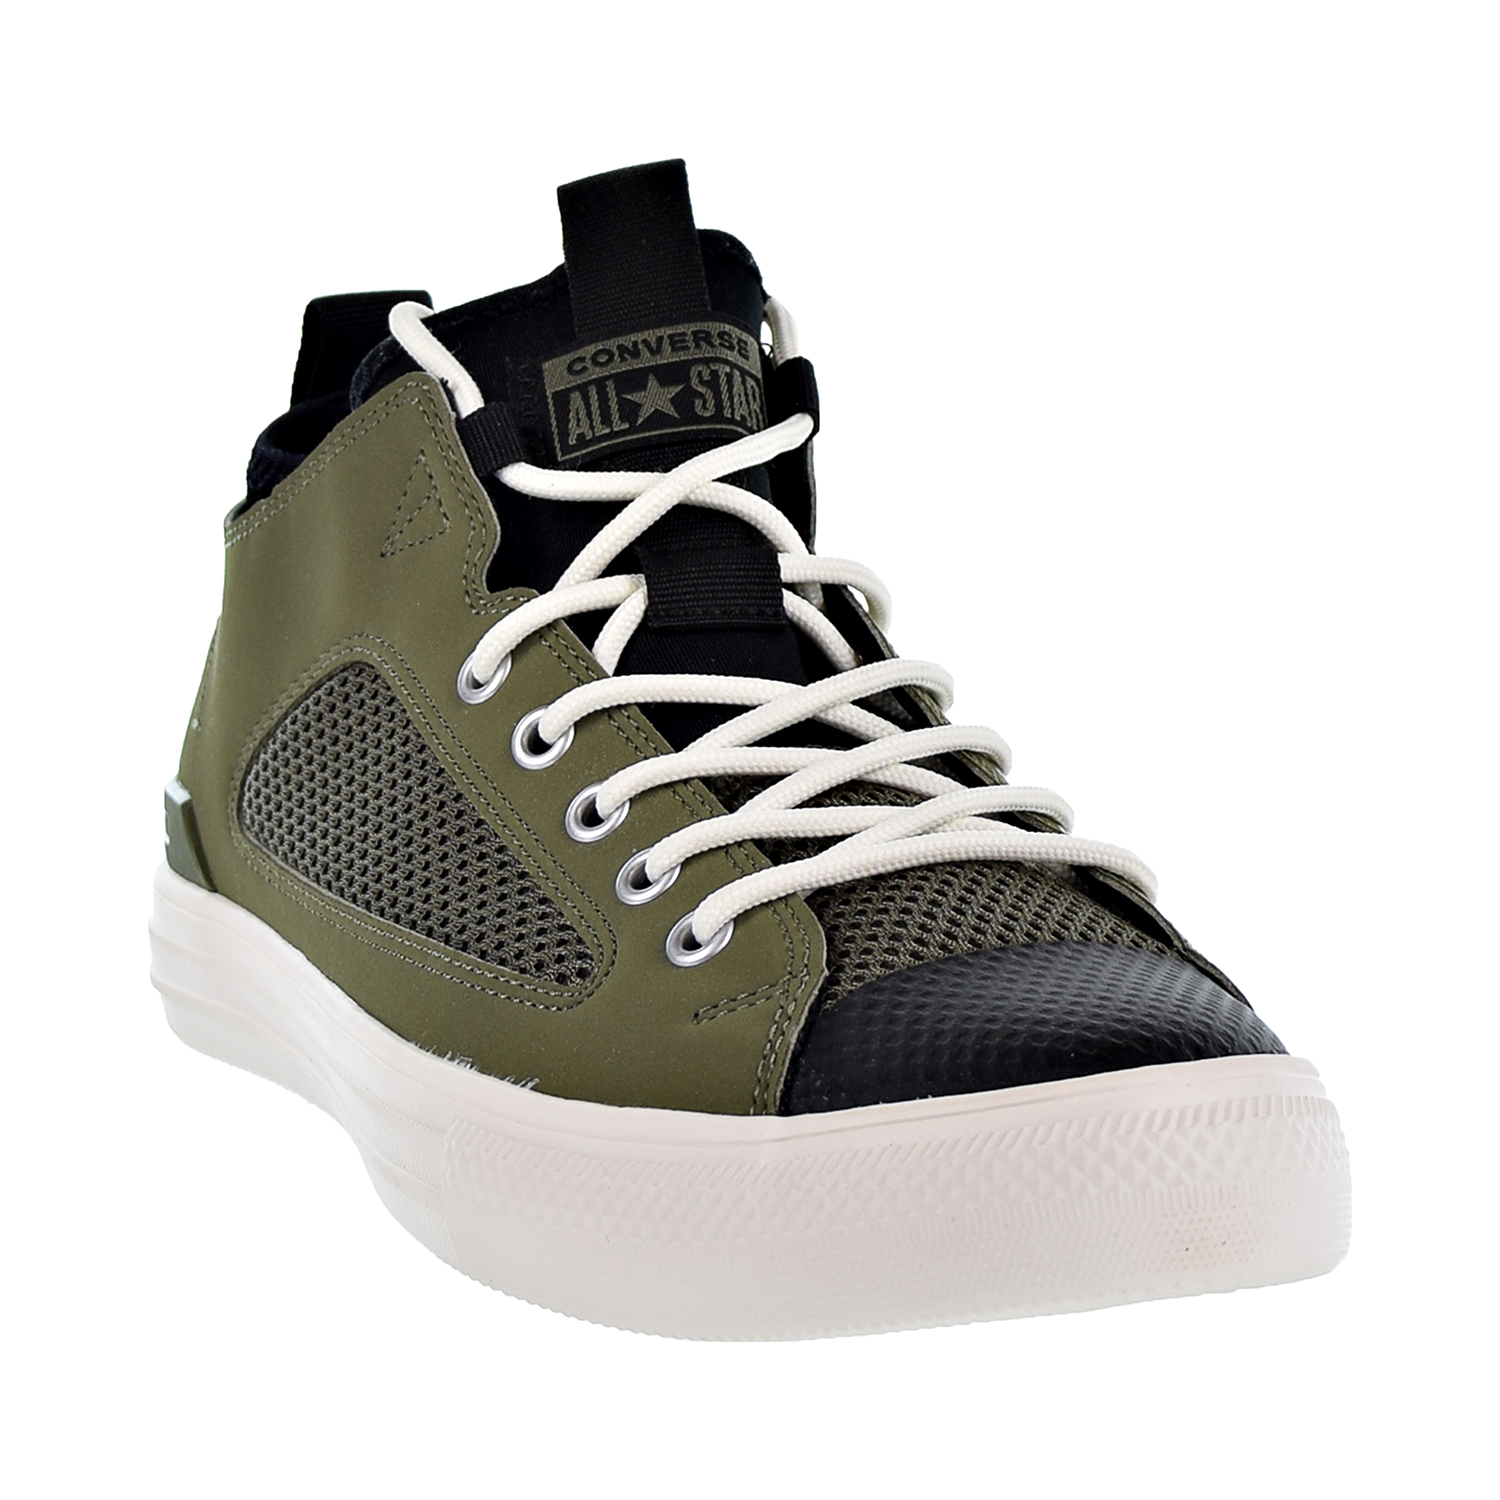 Converse Chuck Taylor All Star Ultra Ox Unisex Shoes Field Surplus-Black-Egret 161476c - image 2 of 6